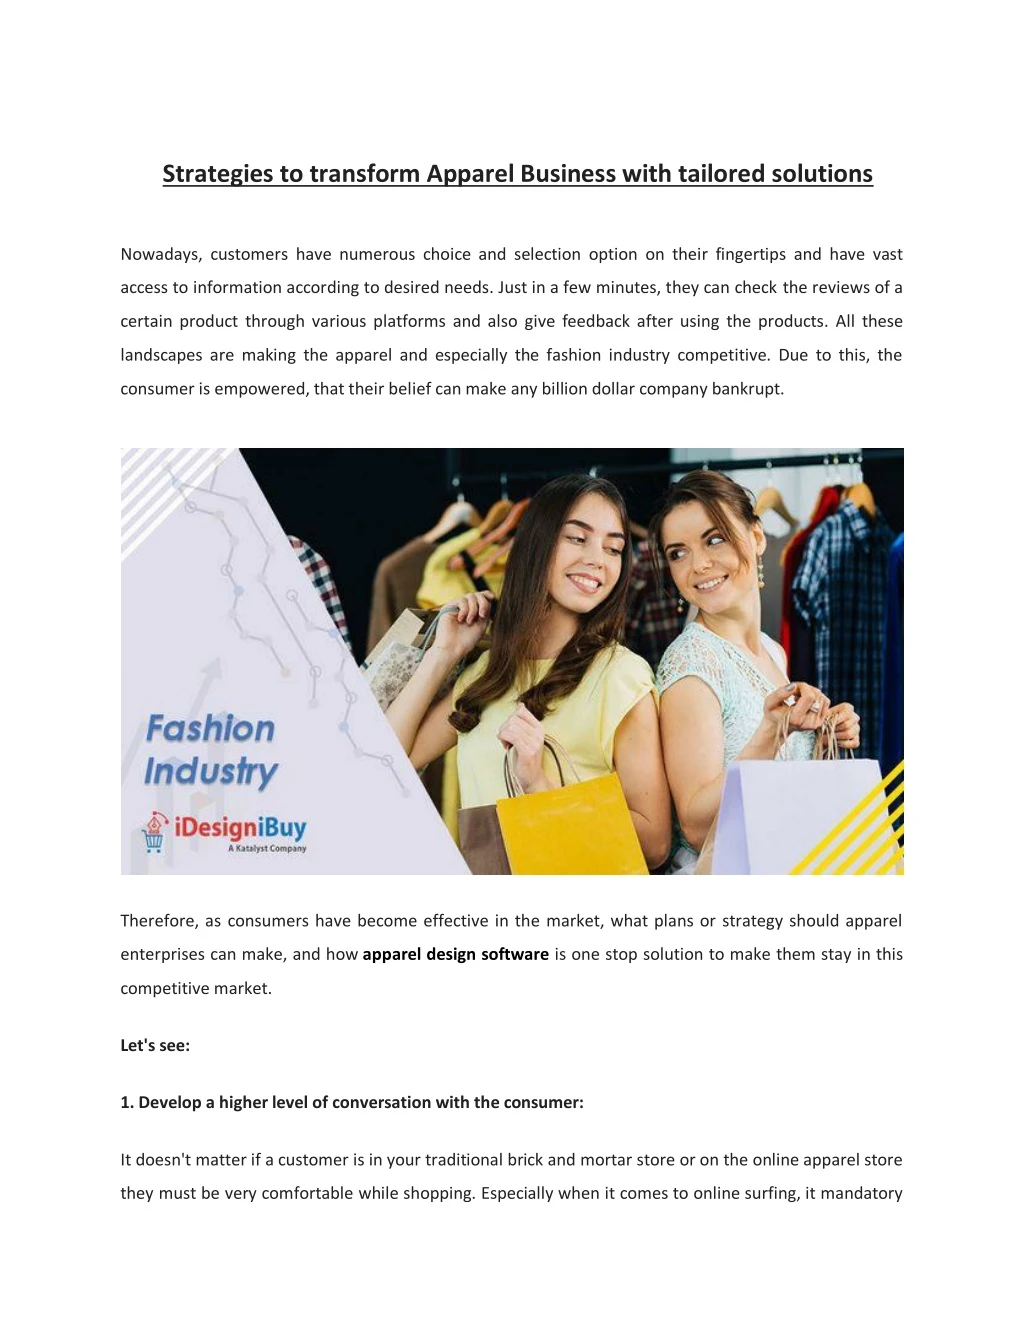 strategies to transform apparel business with